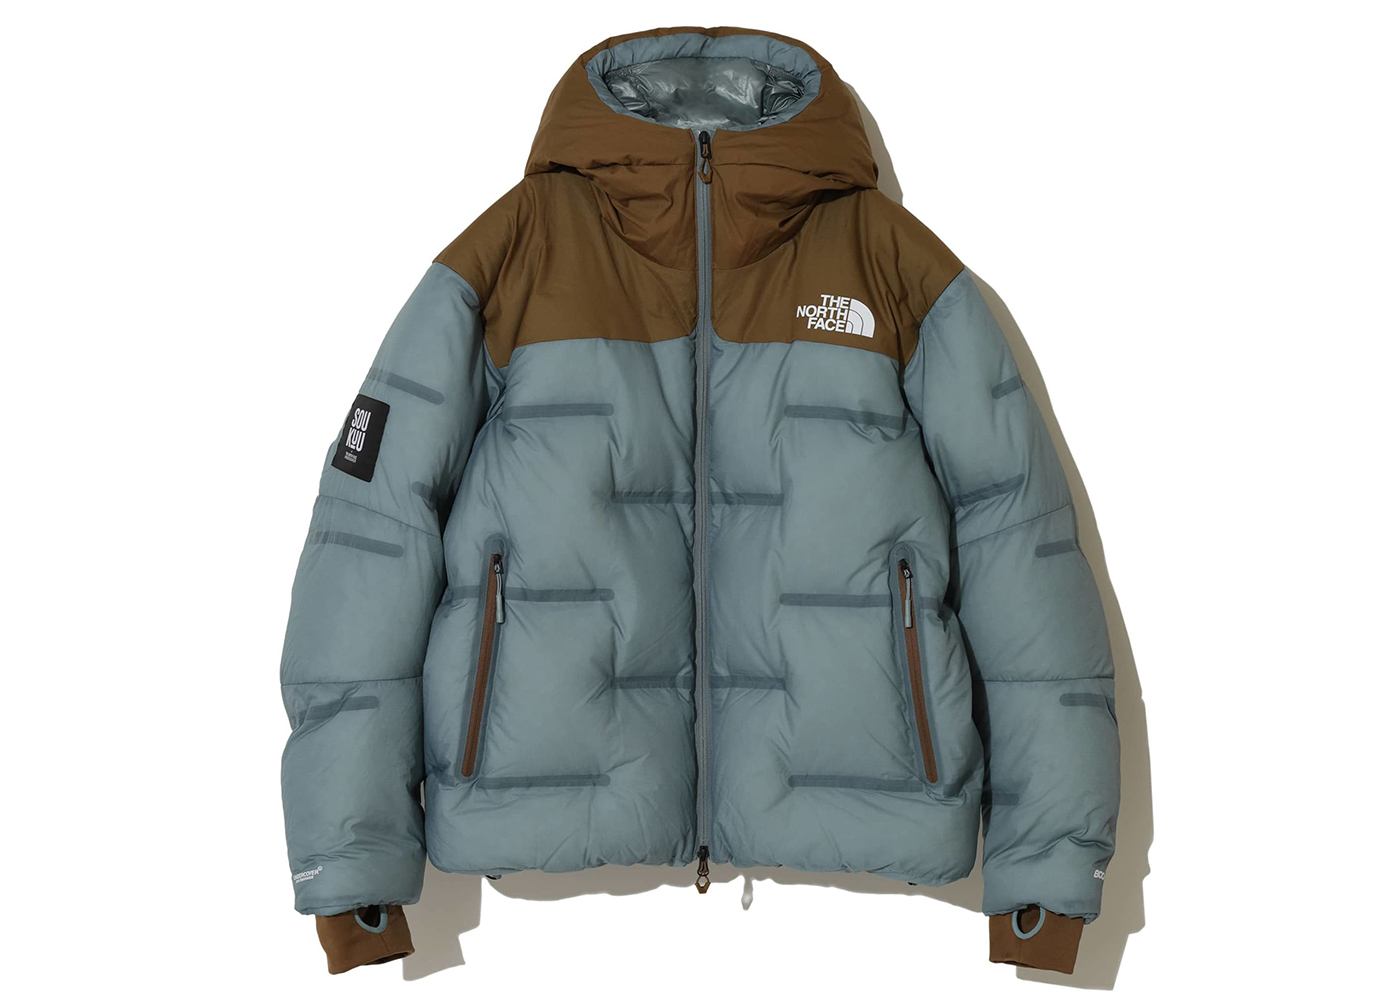 UNDERCOVER x THE NORTH FACE SOUKUU